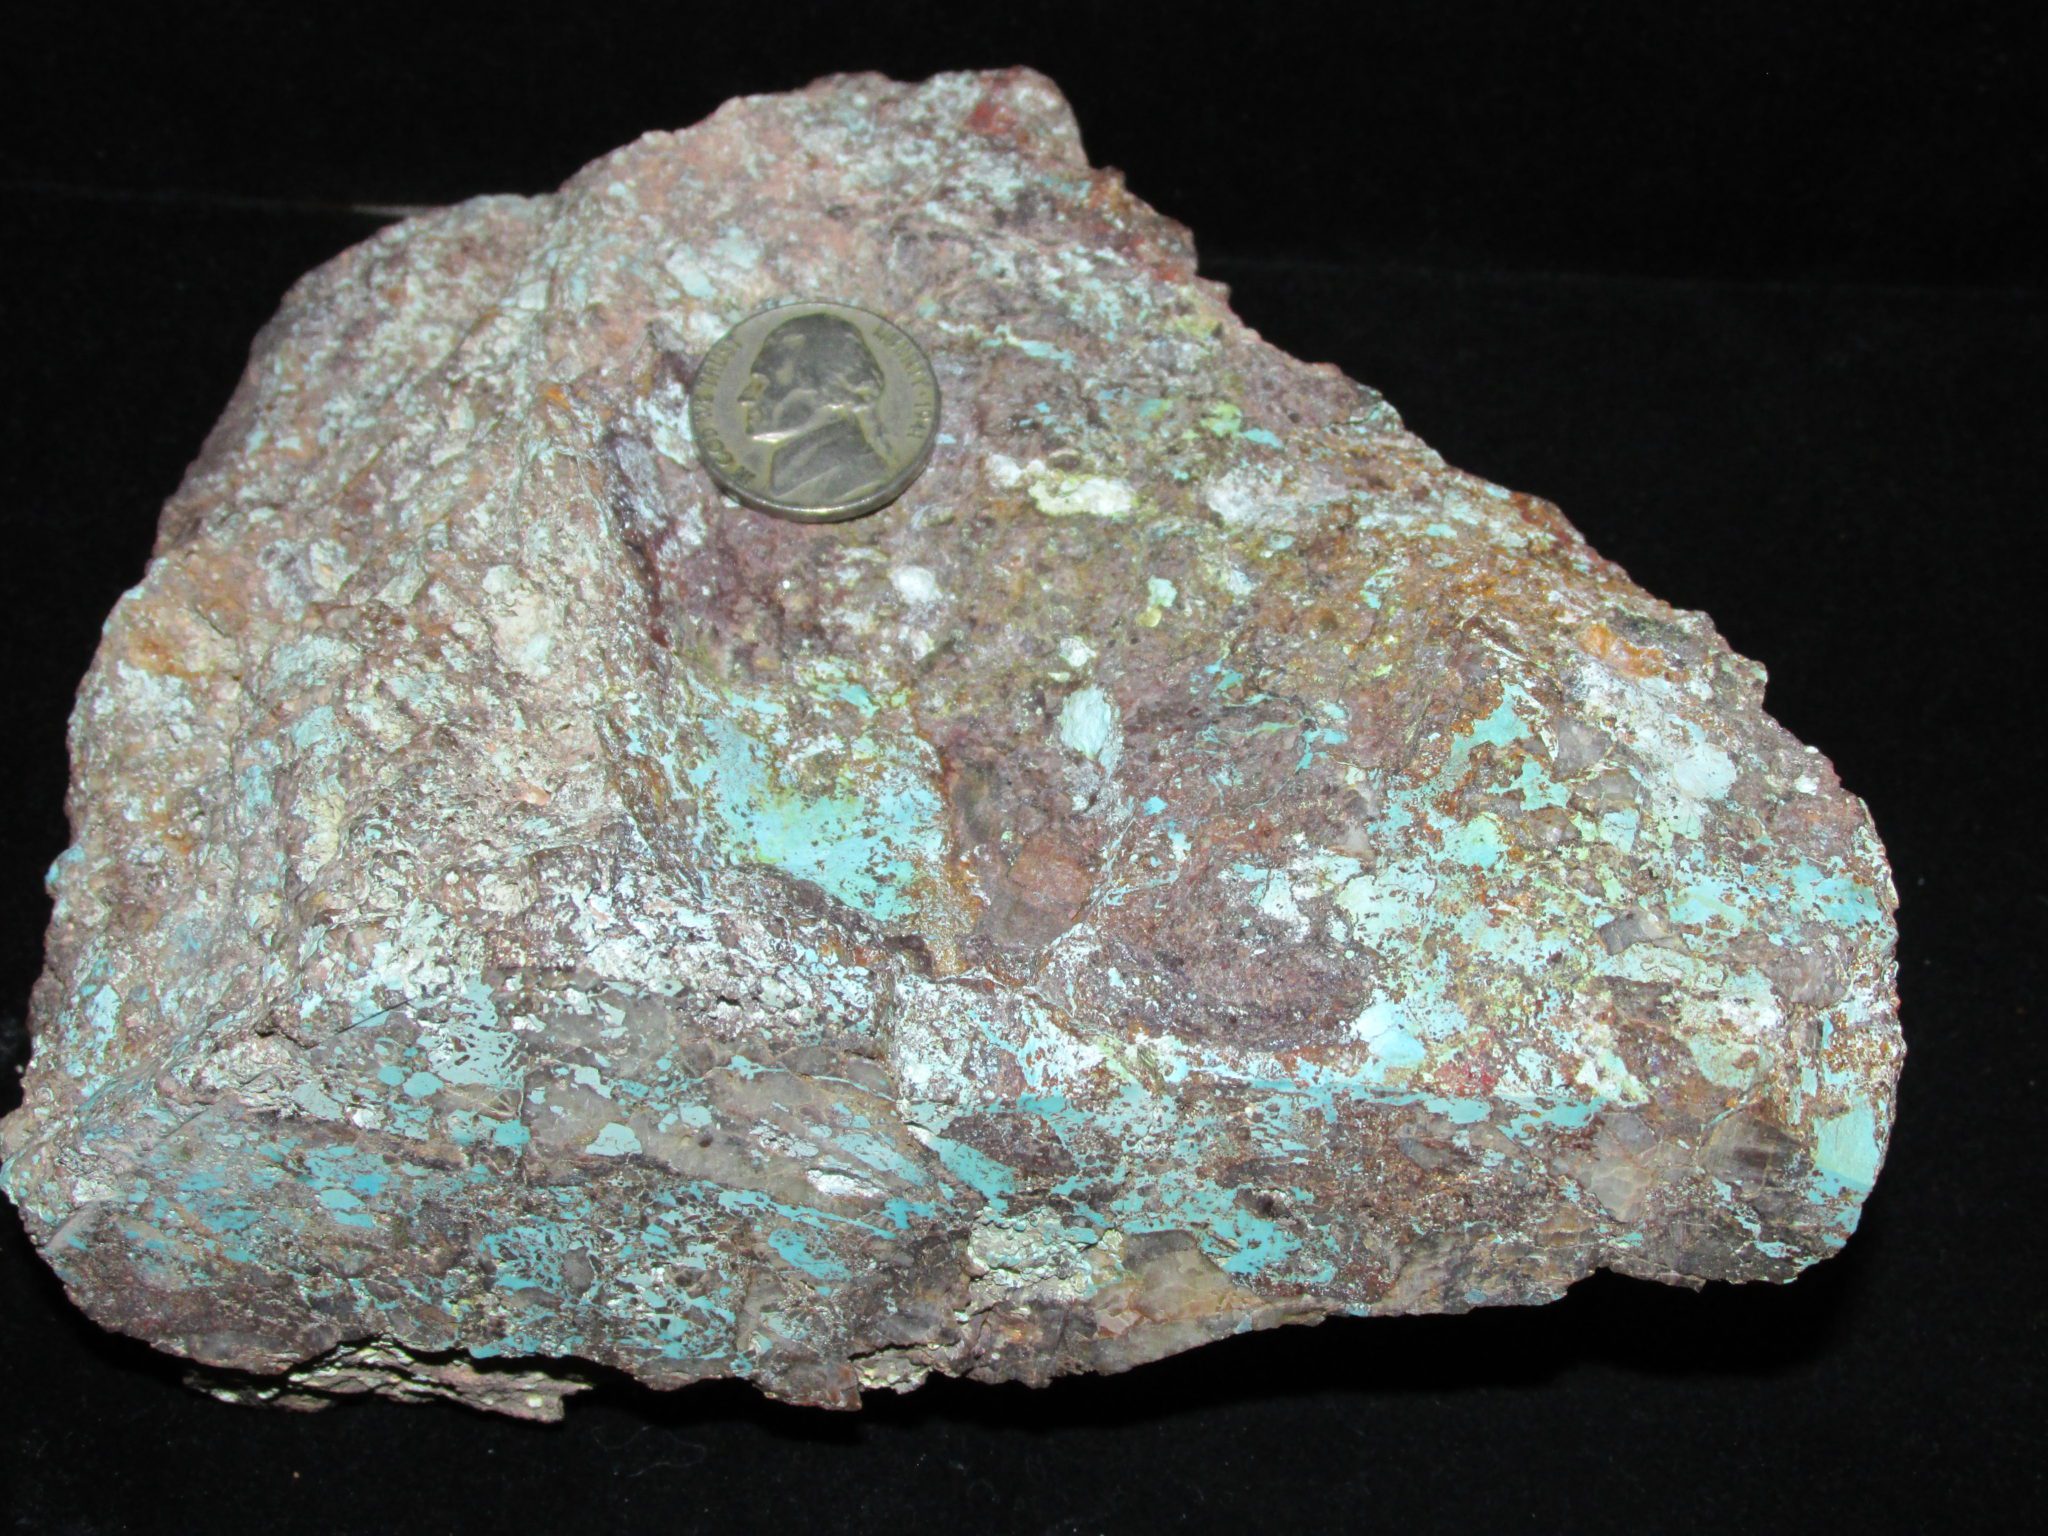 Huge Bisbee Turquoise "Ore" with classic conglomerate lavender host rock